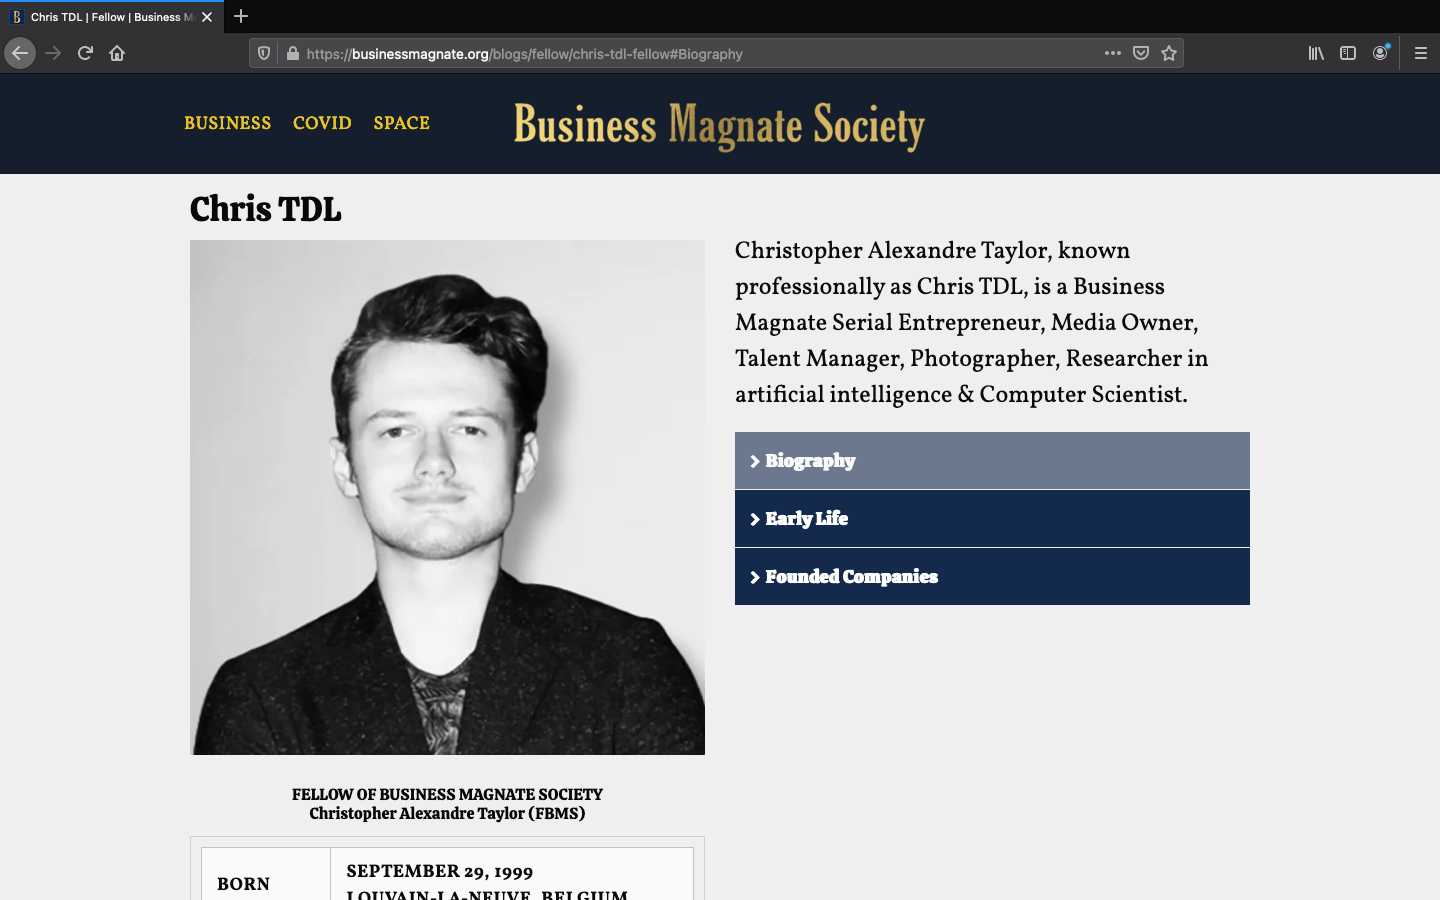 Entrepreneur and researcher Chris TDL (FBMS) Elected as Fellow of the Business Magnate Society., Magnate Daily